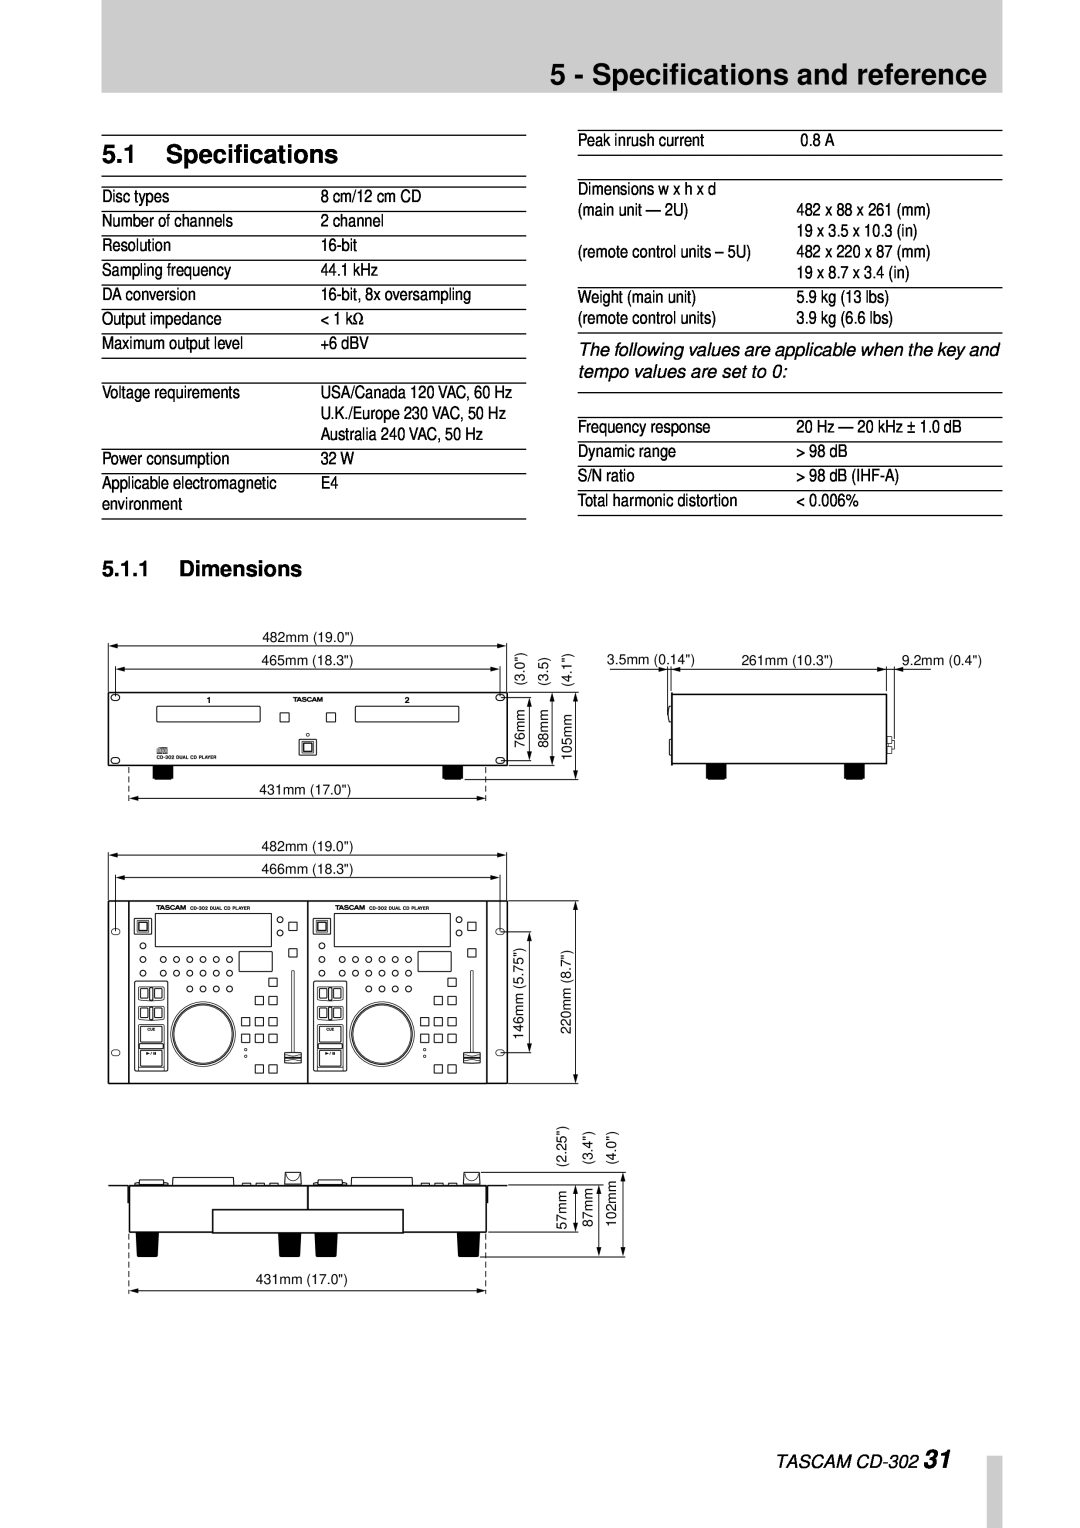 Tascam owner manual Specifications and reference, 5.1Speciﬁcations, 5.1.1Dimensions, TASCAM CD-302 